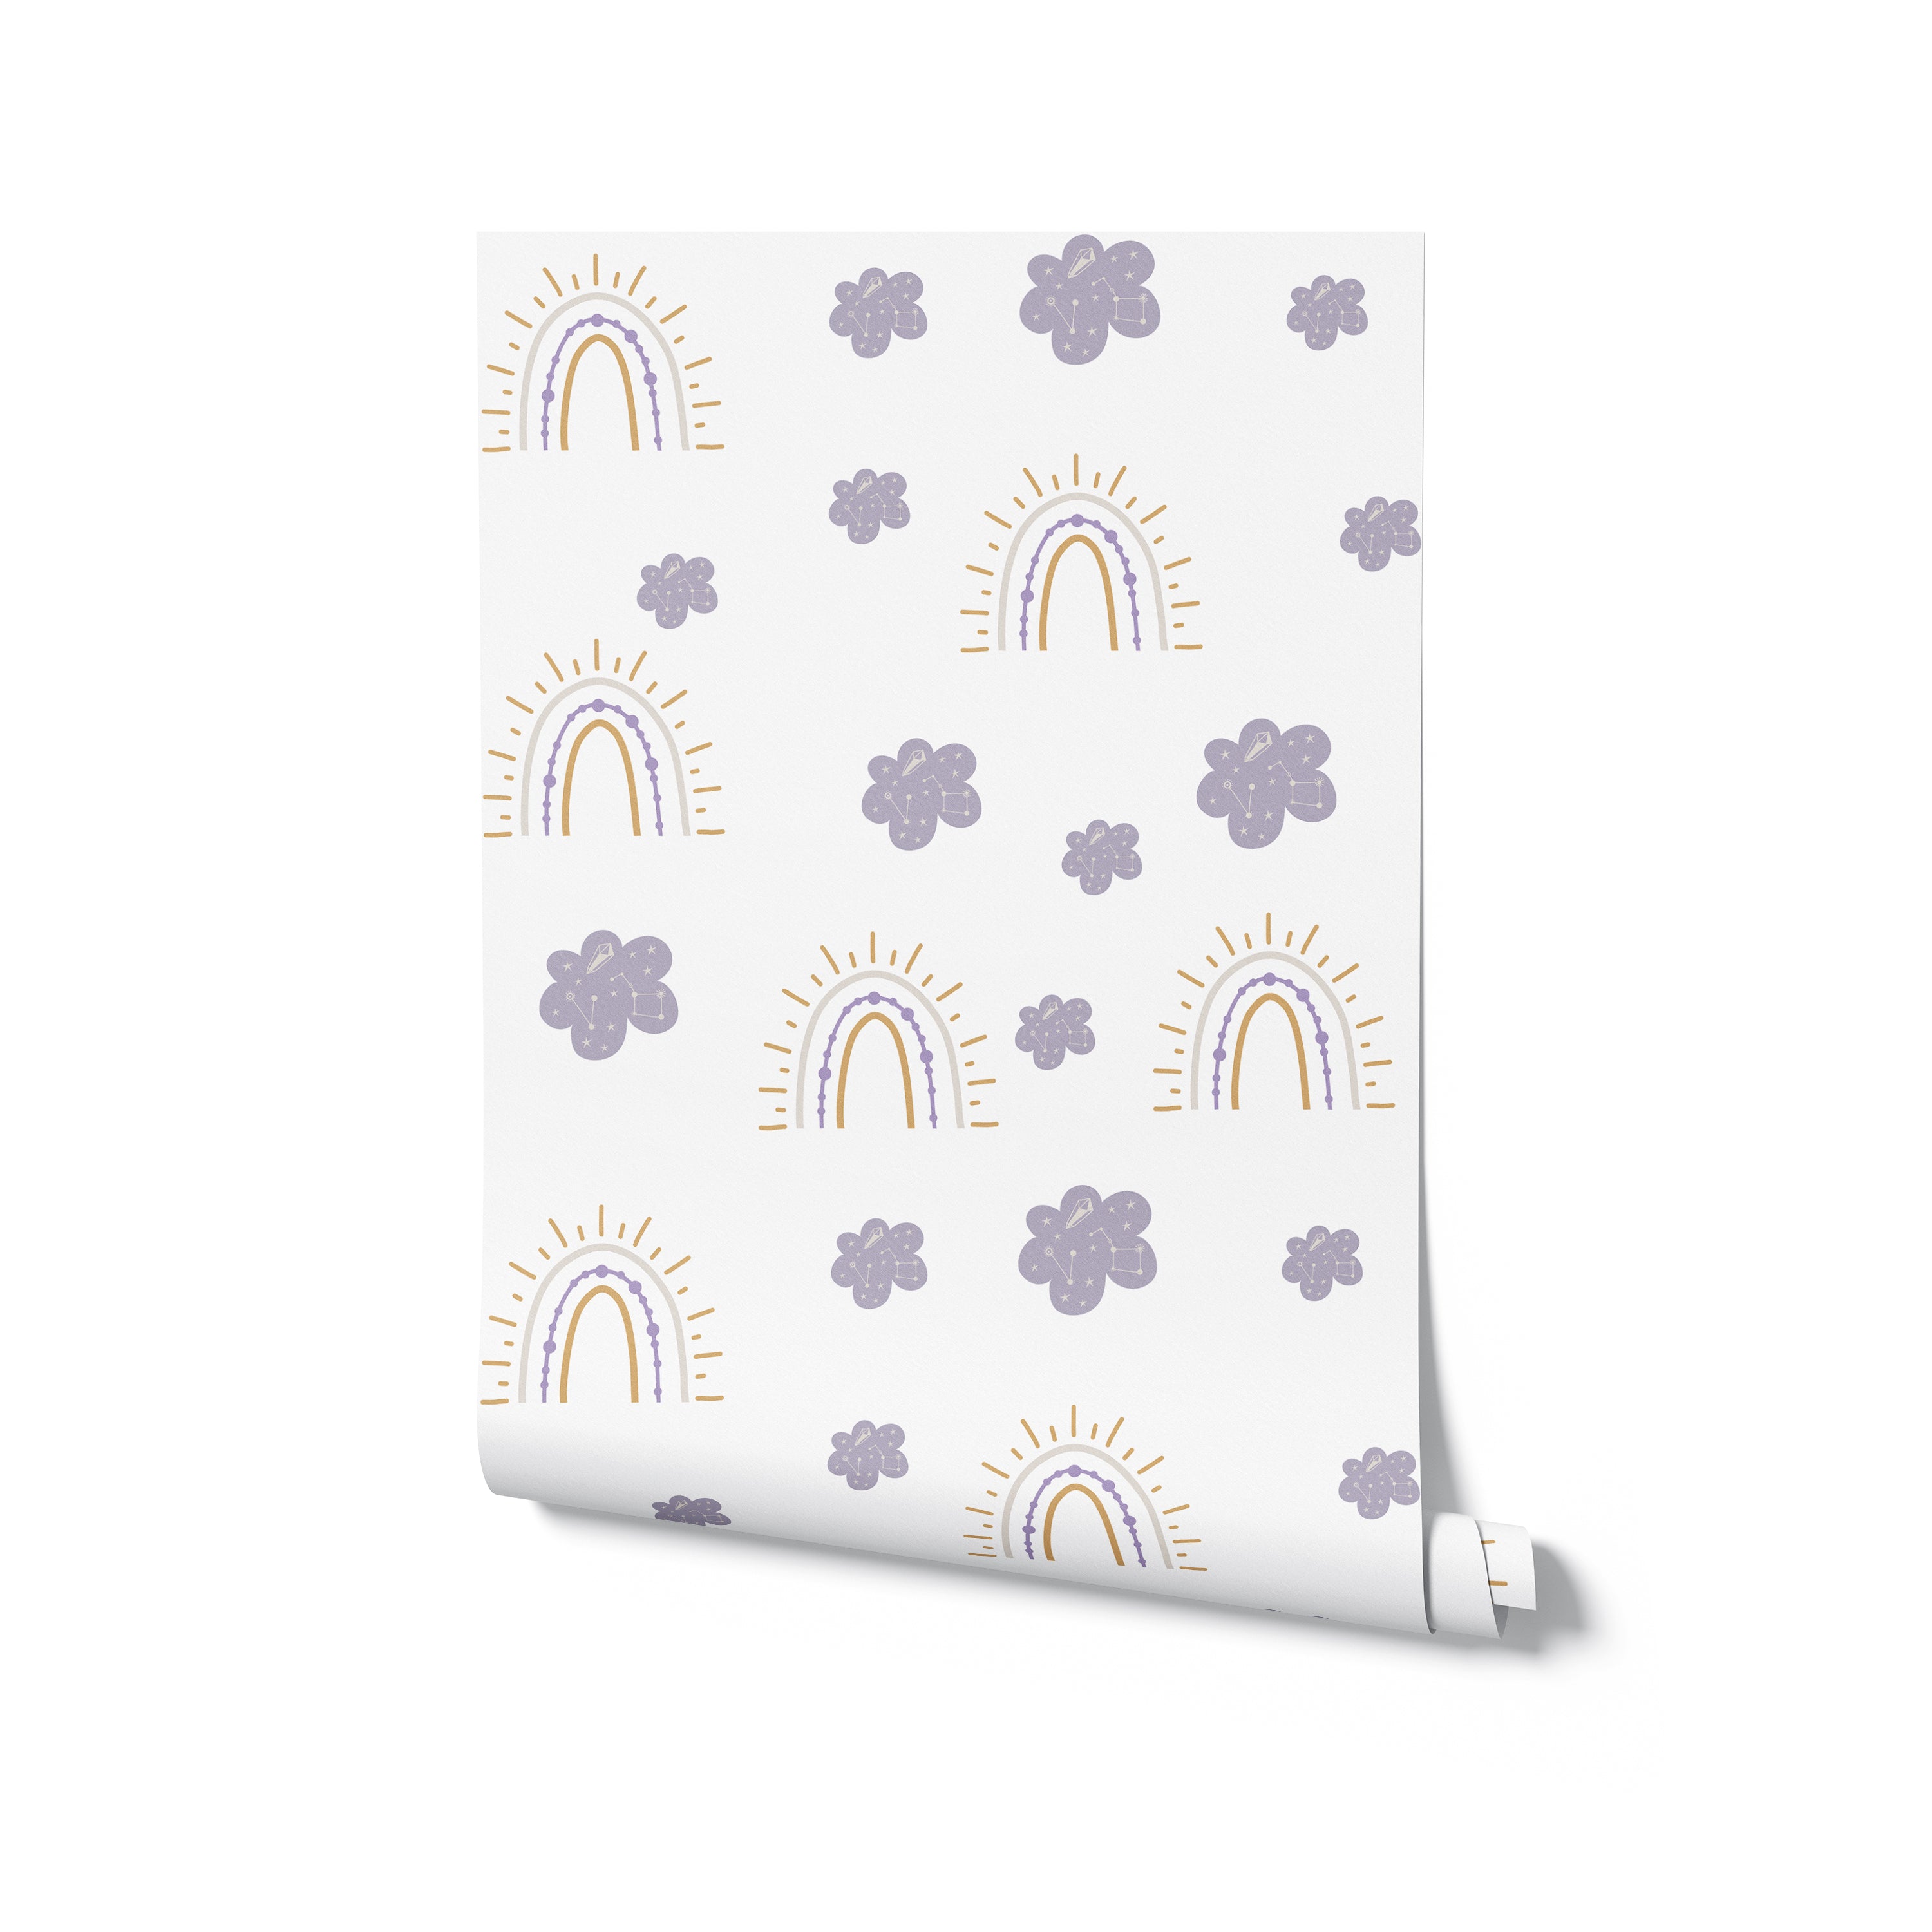 A roll of Rainbow and Clouds Kids Wallpaper with a charming pattern of colorful rainbows and cute clouds on a clean white base, ideal for adding a touch of whimsy and color to any nursery or playroom